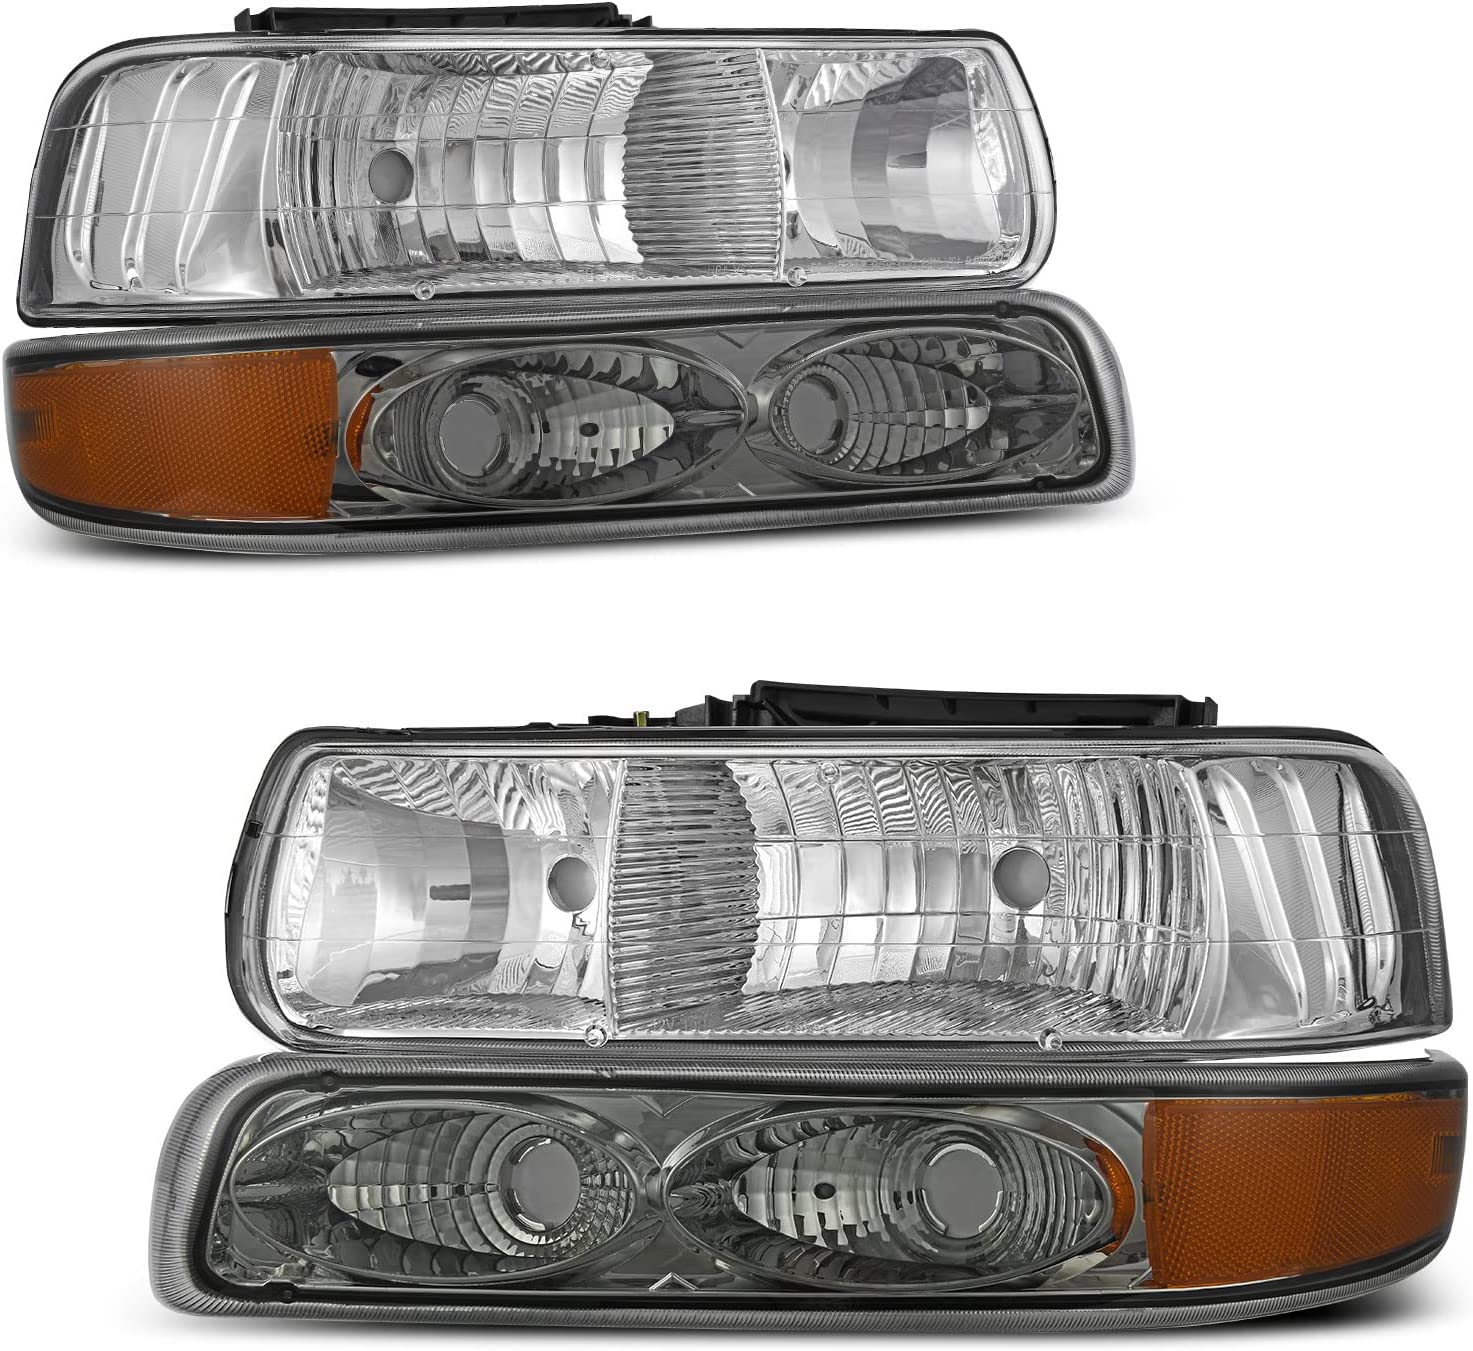 AUTOSAVER88 Headlights Assembly Compatible with 1999-2002 Chevy